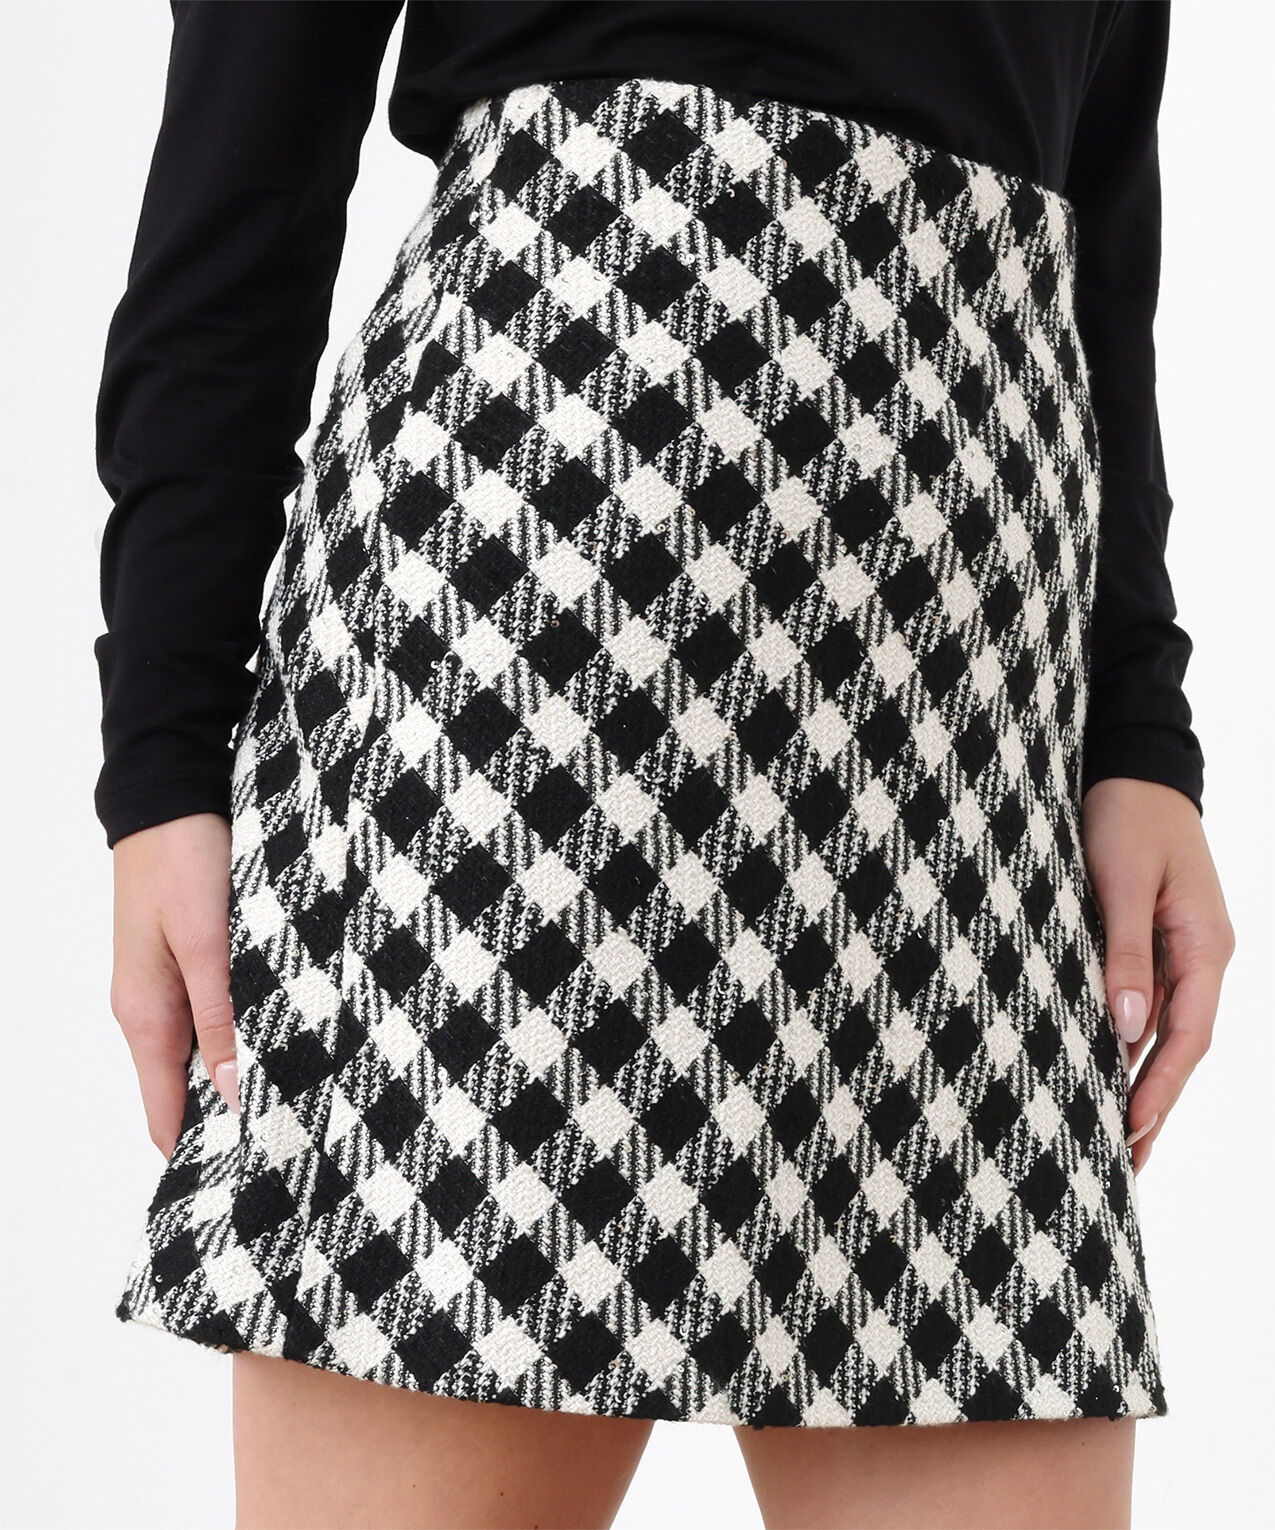 Petite Woven French Check Skirt